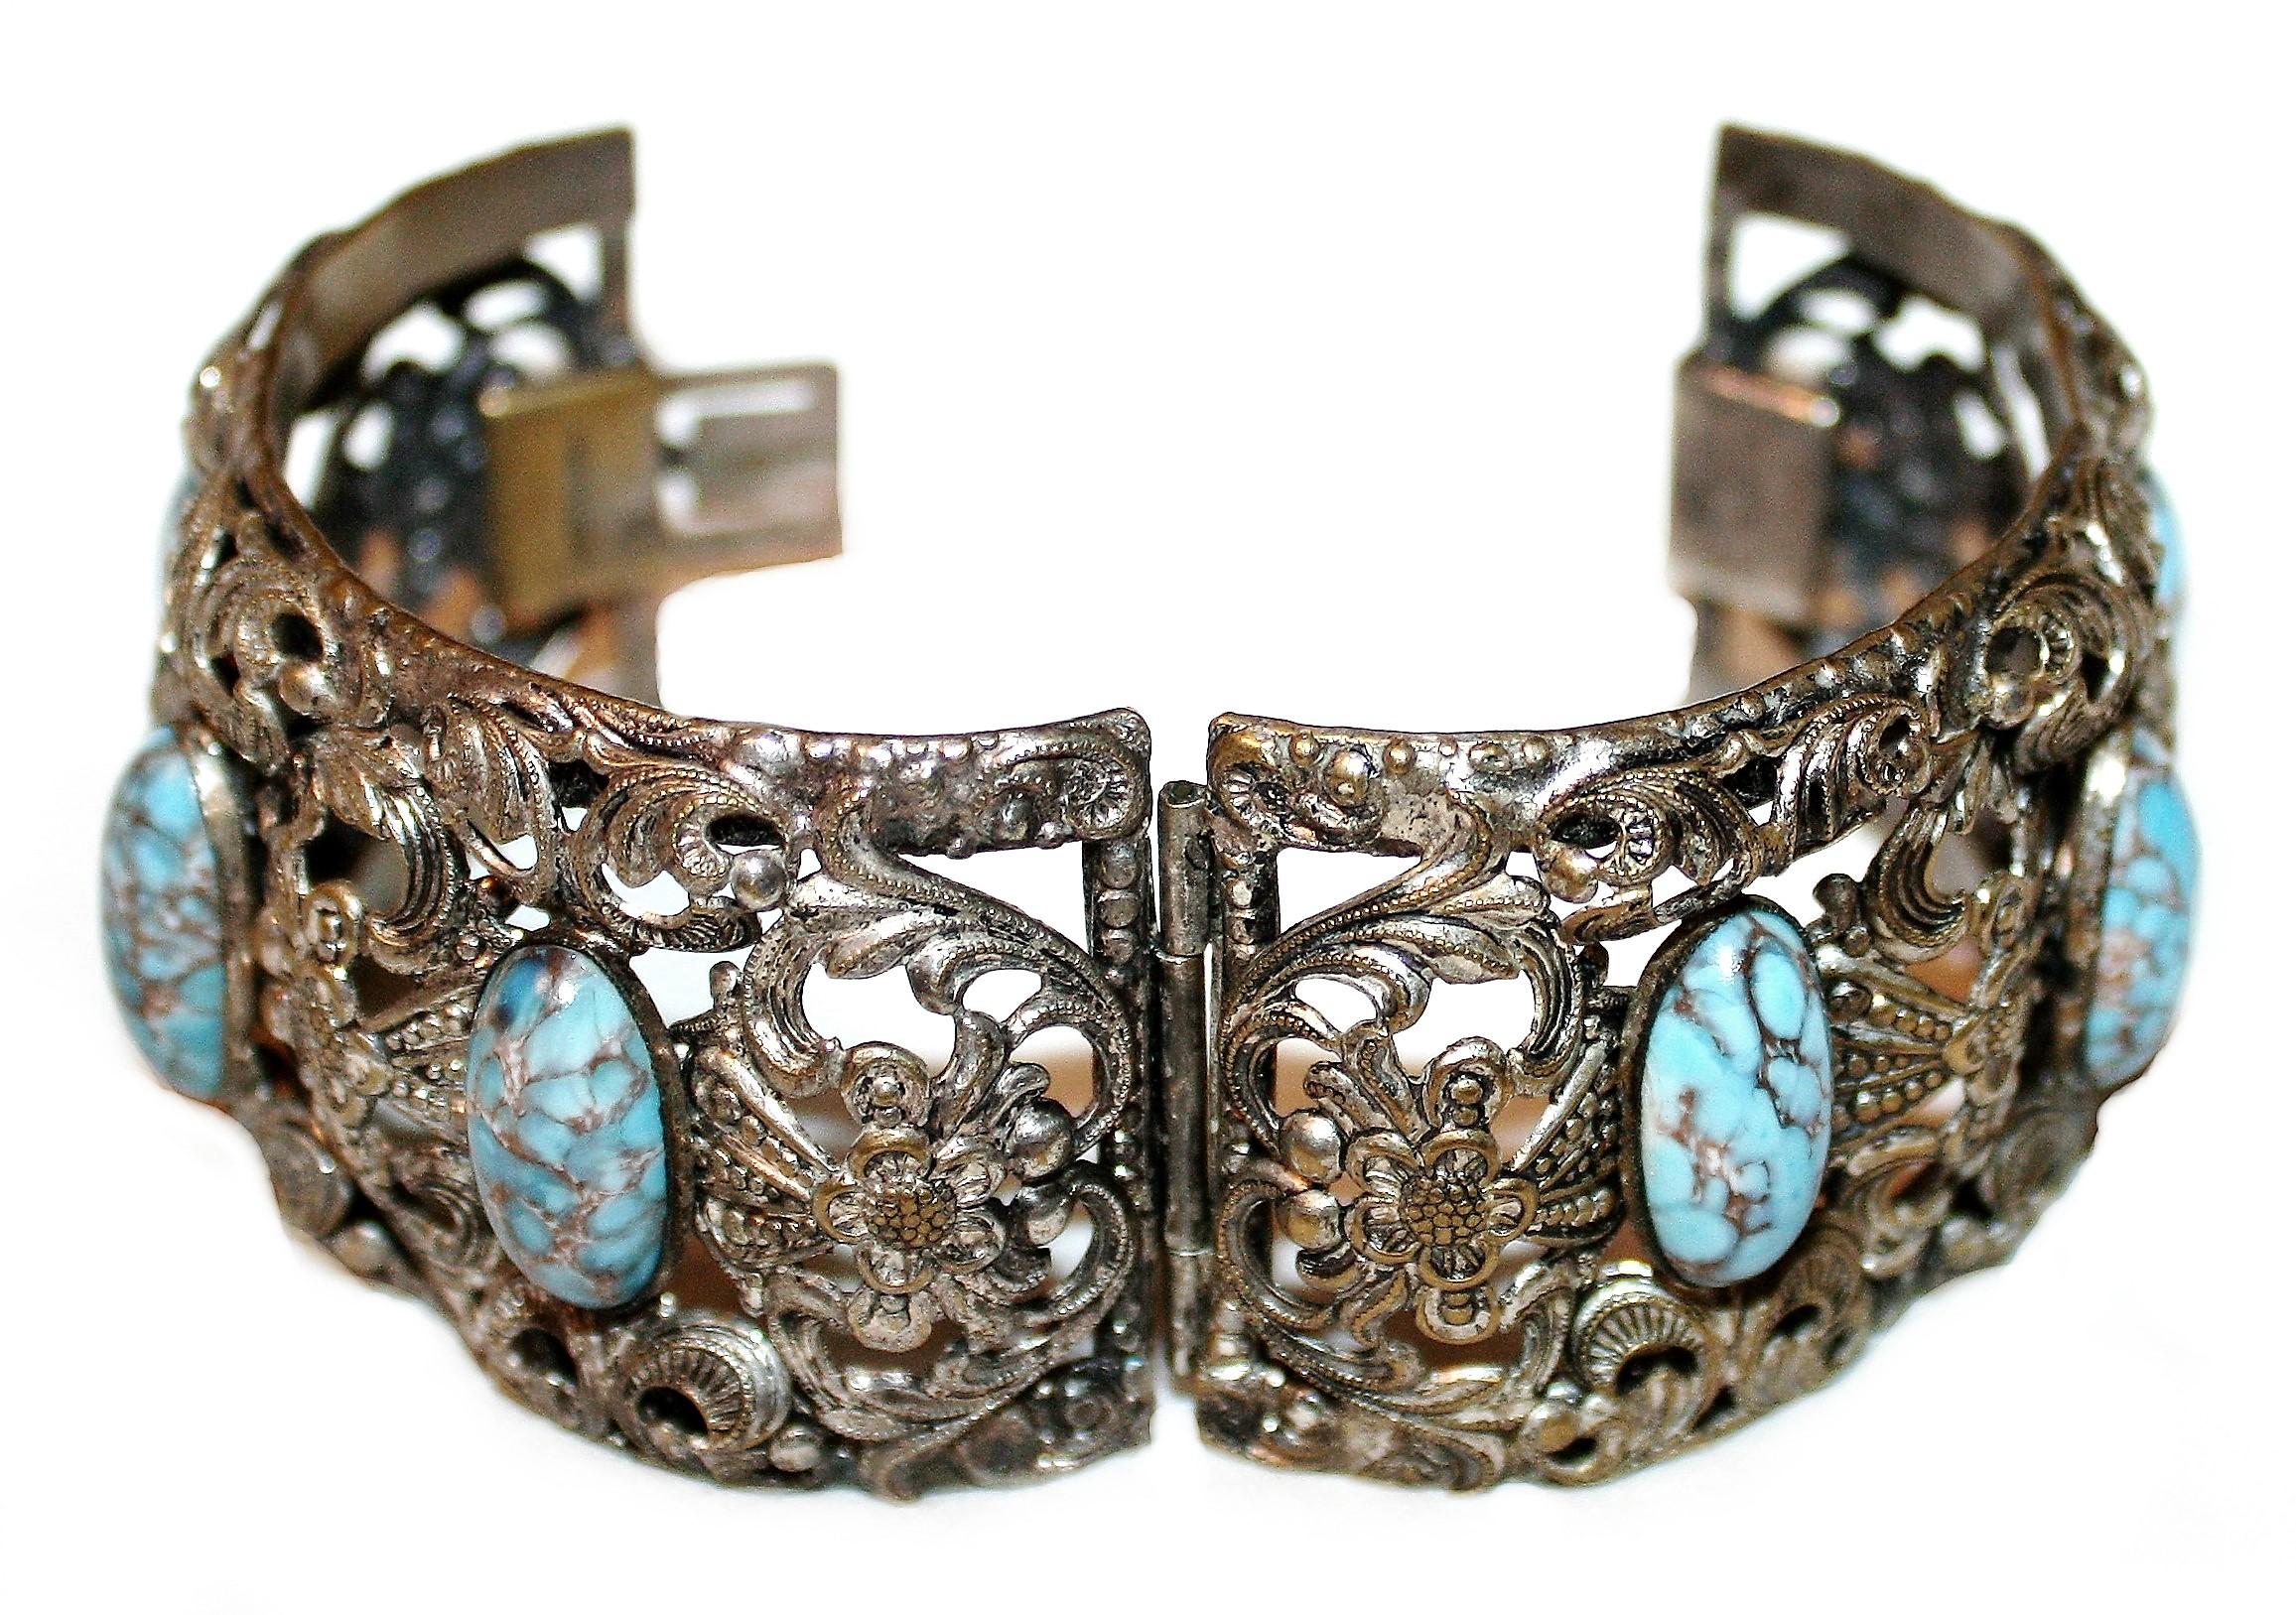 Circa 1930s Plated Brass & Blue Glass Cabochon Hinged Bangle im Zustand „Gut“ im Angebot in Long Beach, CA